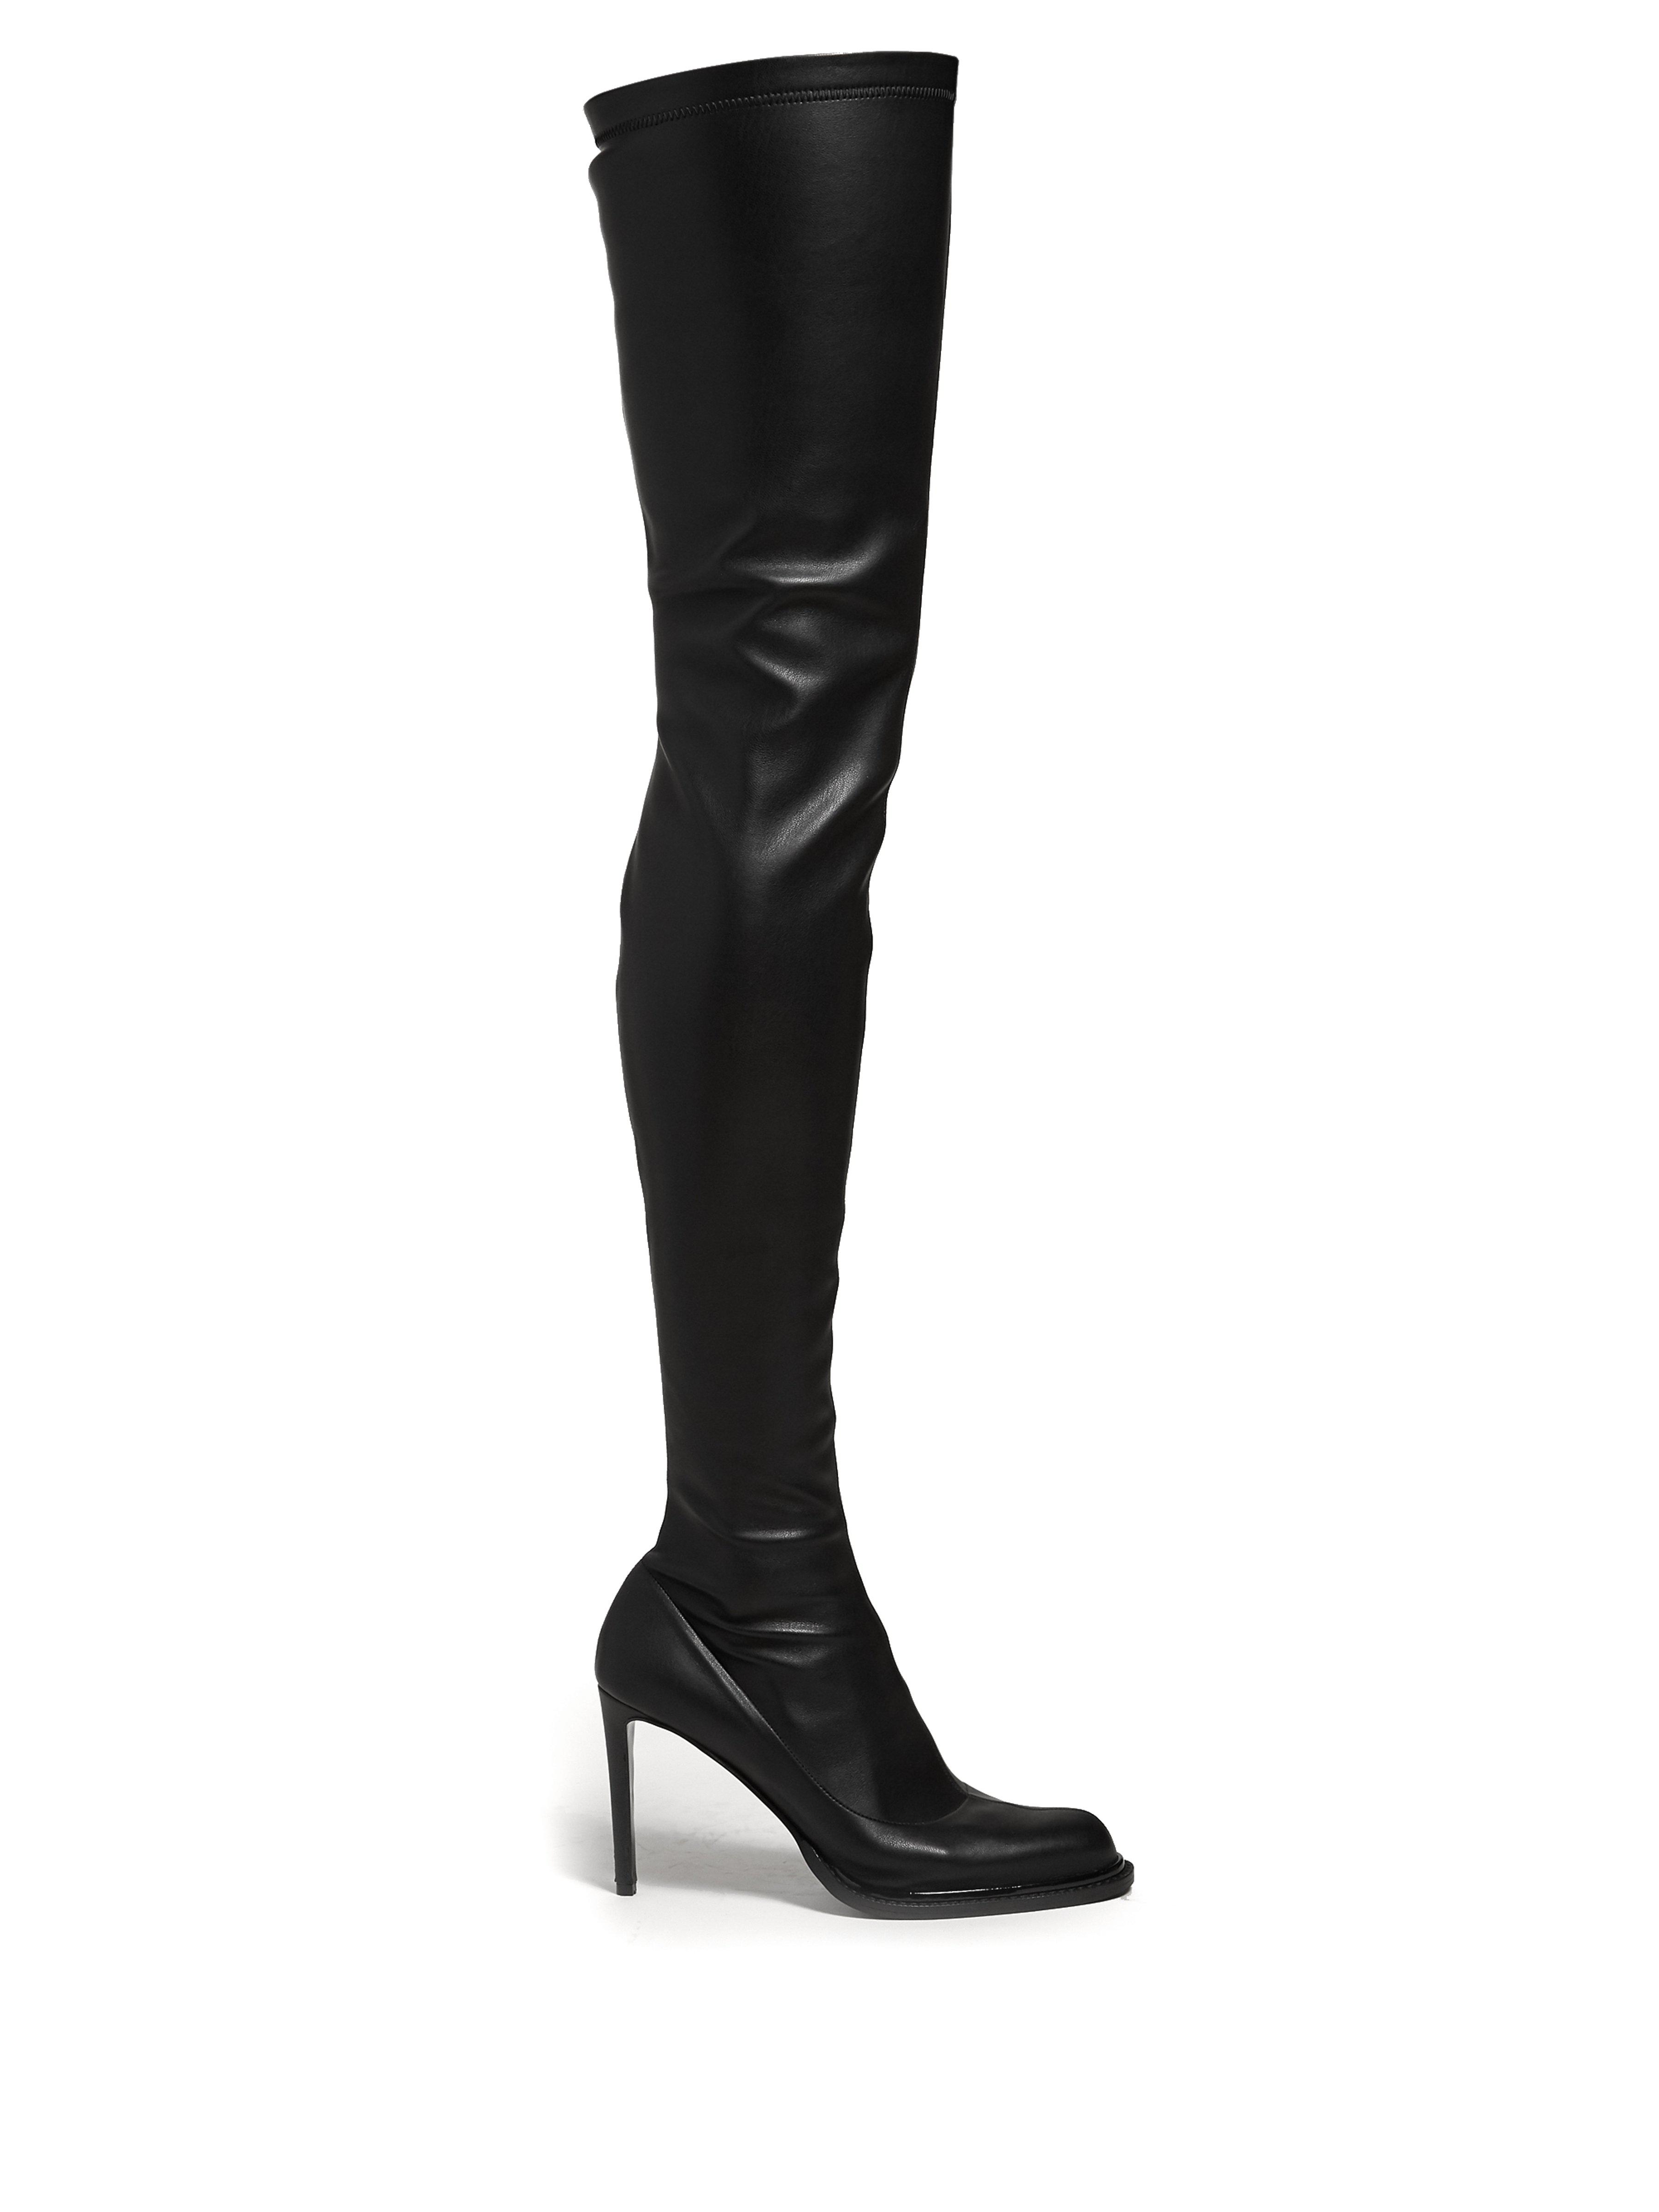 Stella McCartney Over-the-knee Boots in Black - Lyst